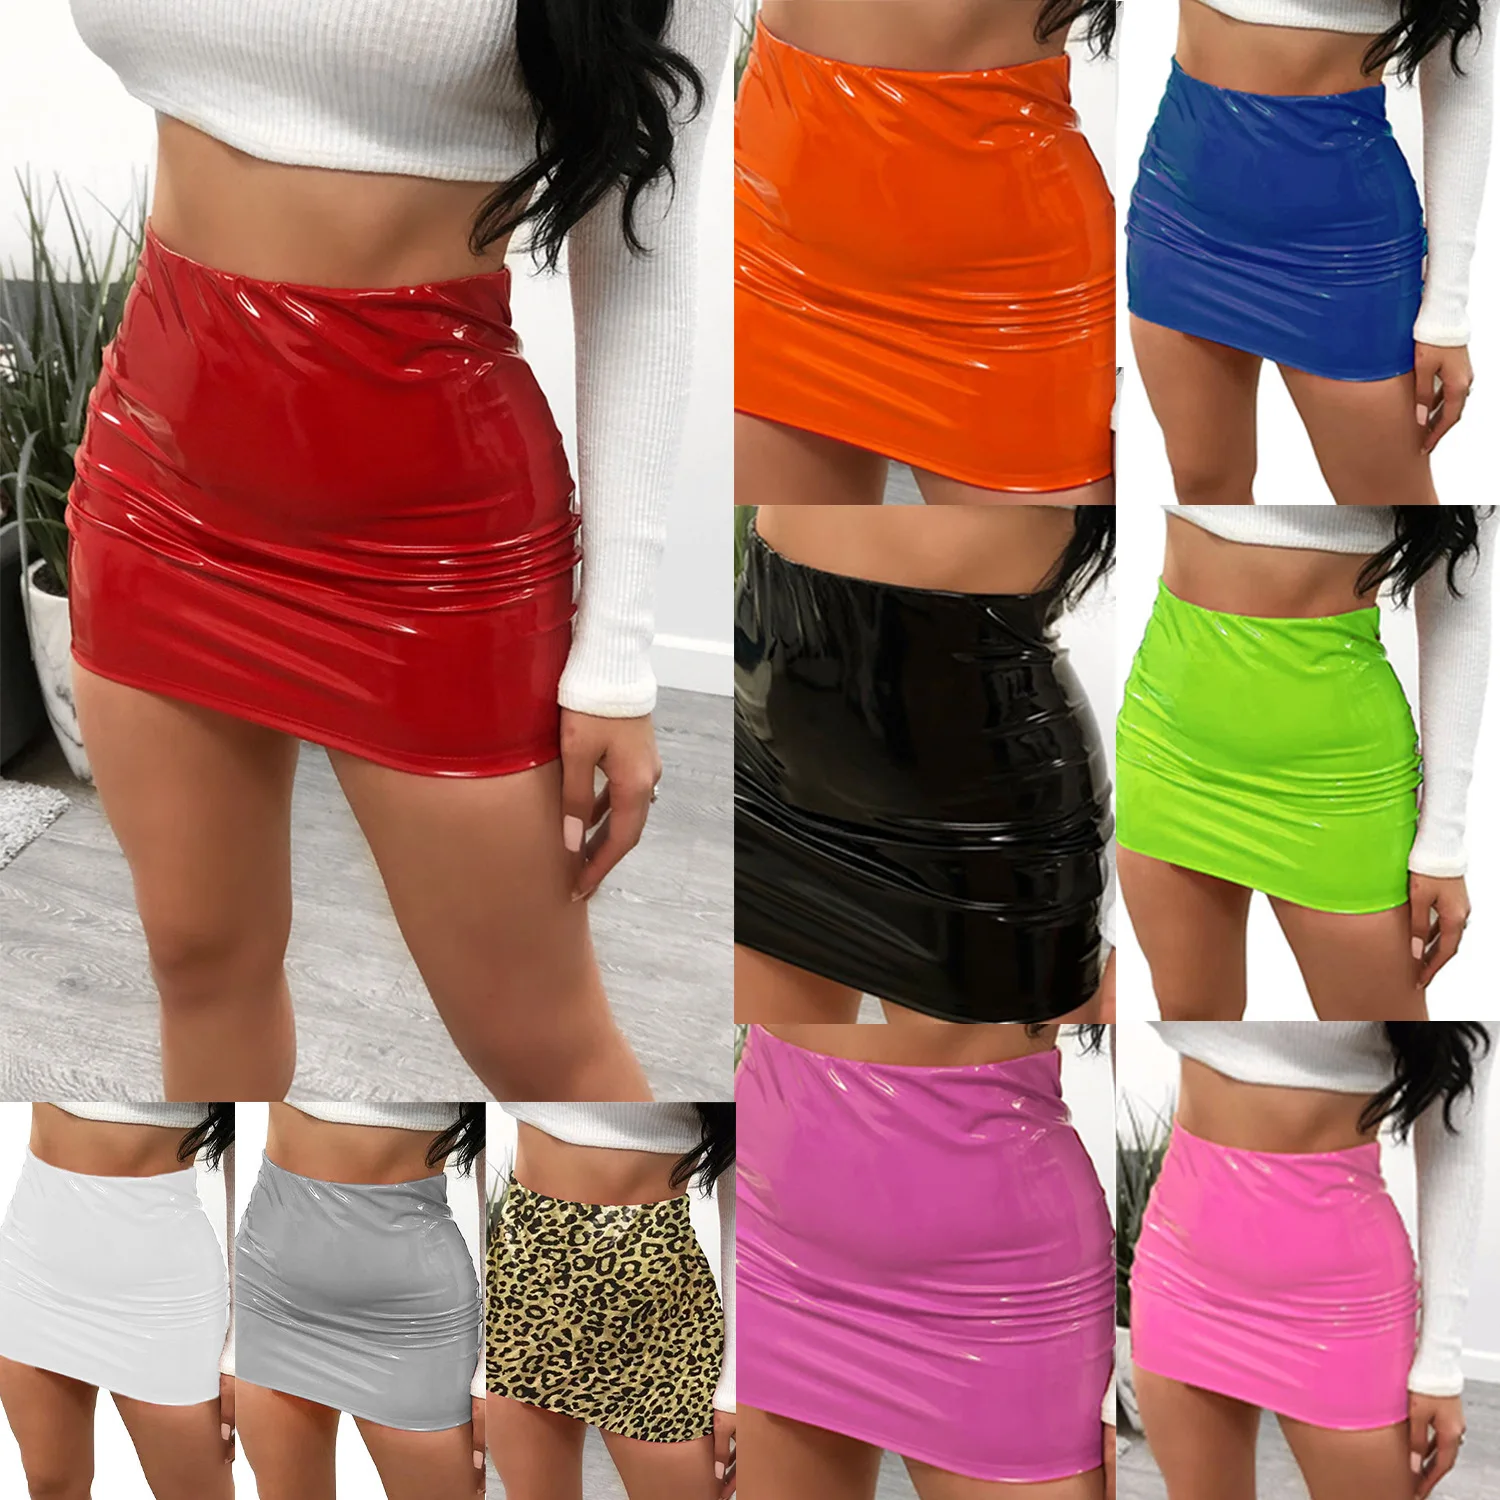 Tight Mini Skirt 2021 New Arrival Womens Sexy High Waist Fau Leather 4 Color Pencil Skirt Ladies Wear Skirts Plus Size Pu Satin